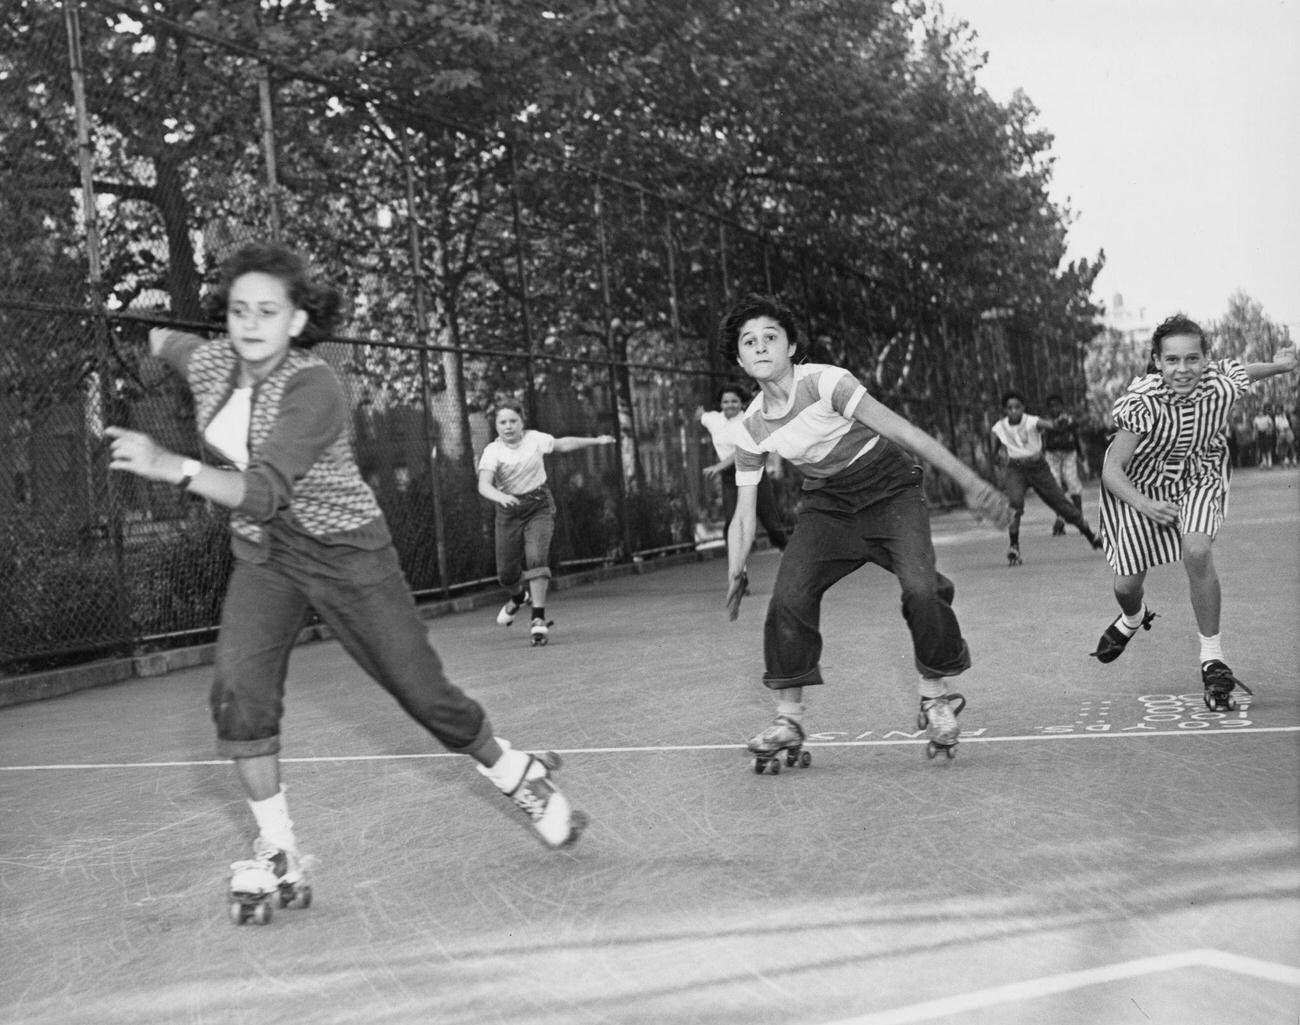 Female Competitors in 75-Yard Race at Winged Skates Contest, New York, circa 1950